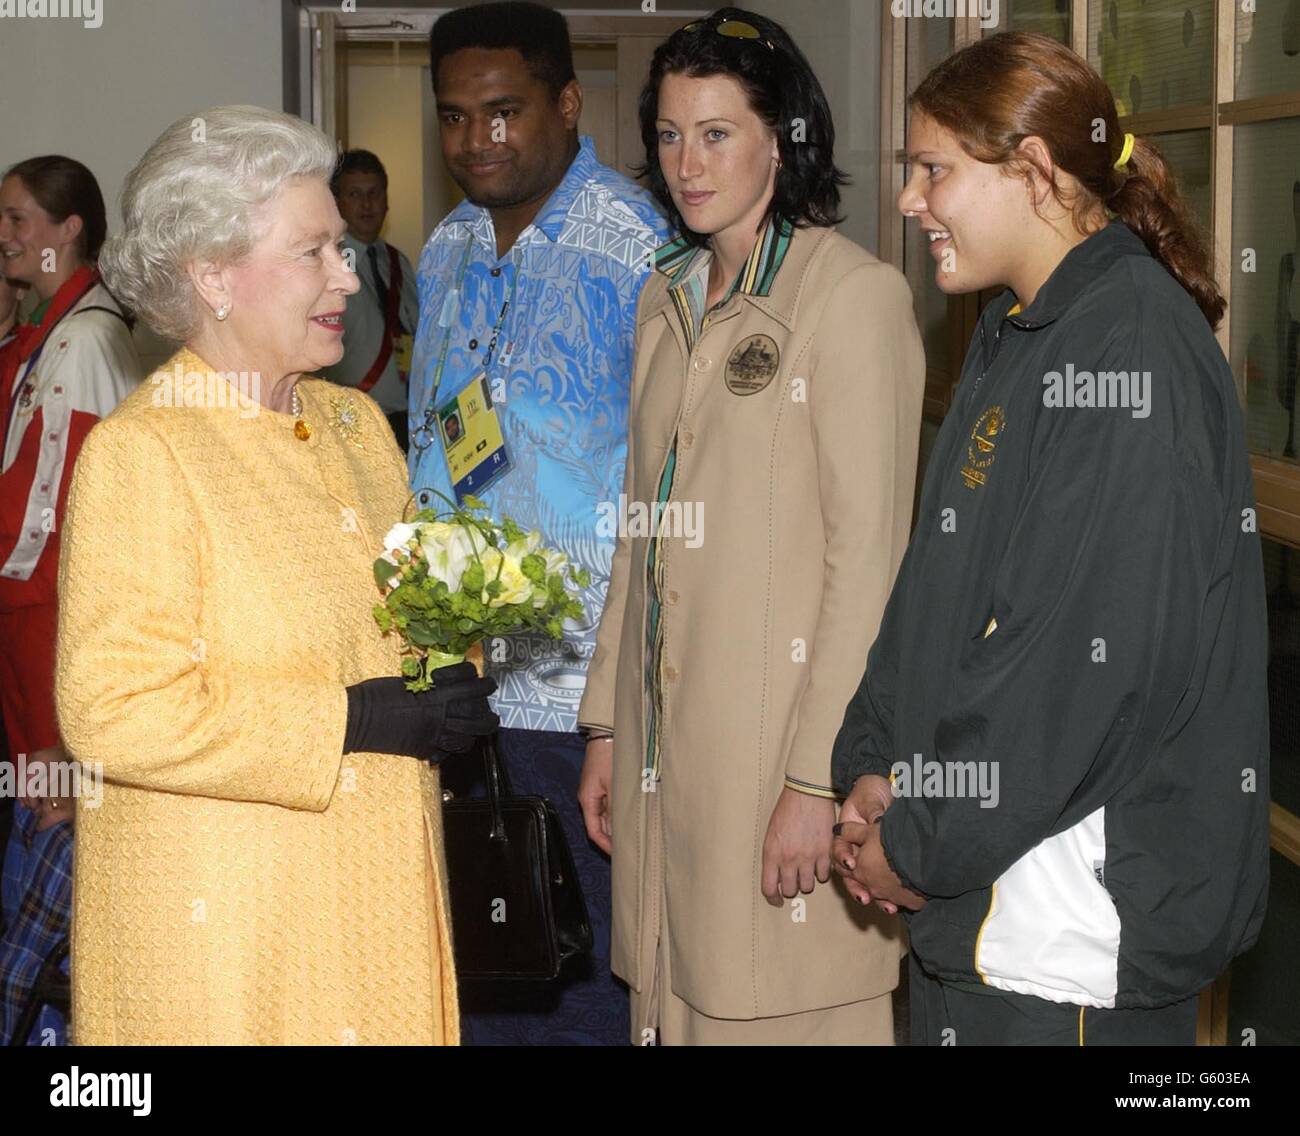 Britain's Queen Elizabeth II meets Commonwealth games medalists (l-r) Fiji's Nalamili Qerewaqa, Jana Pittman of Australia and South African swimmer Natalie du Toit ahead of the closing ceremony of the 2002 Commonwealth Games at the City of Manchester Stadium, Manchester. Stock Photo